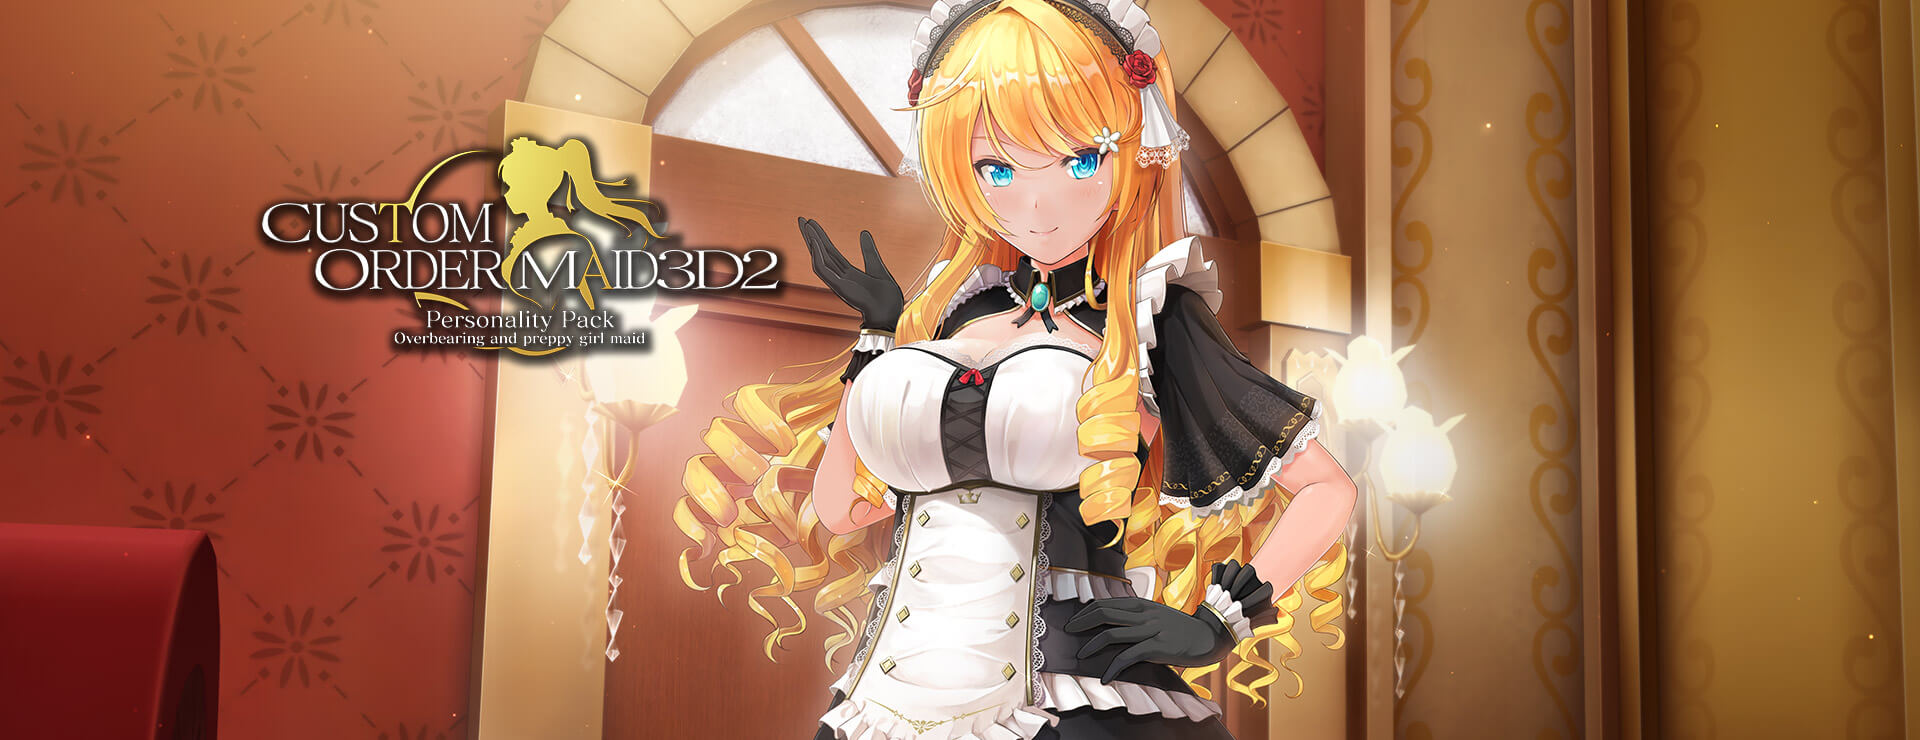 Custom Order Maid 3D2: Overbearing and Preppy Girl Maid DLC - Simulation Jeu